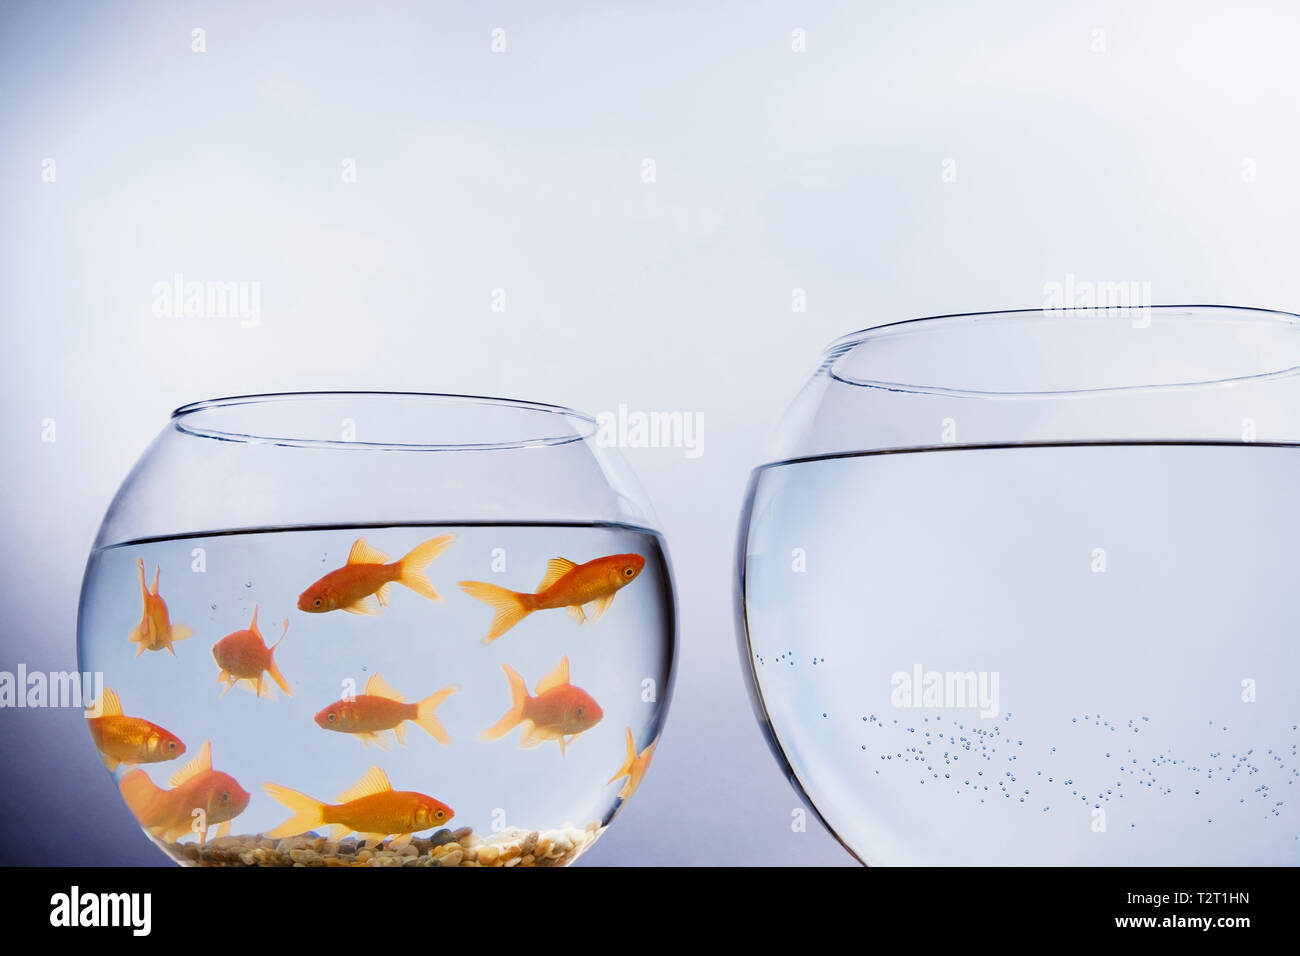 Goldfish in a crowded bowl staring at a bigger bowl Stock Photo